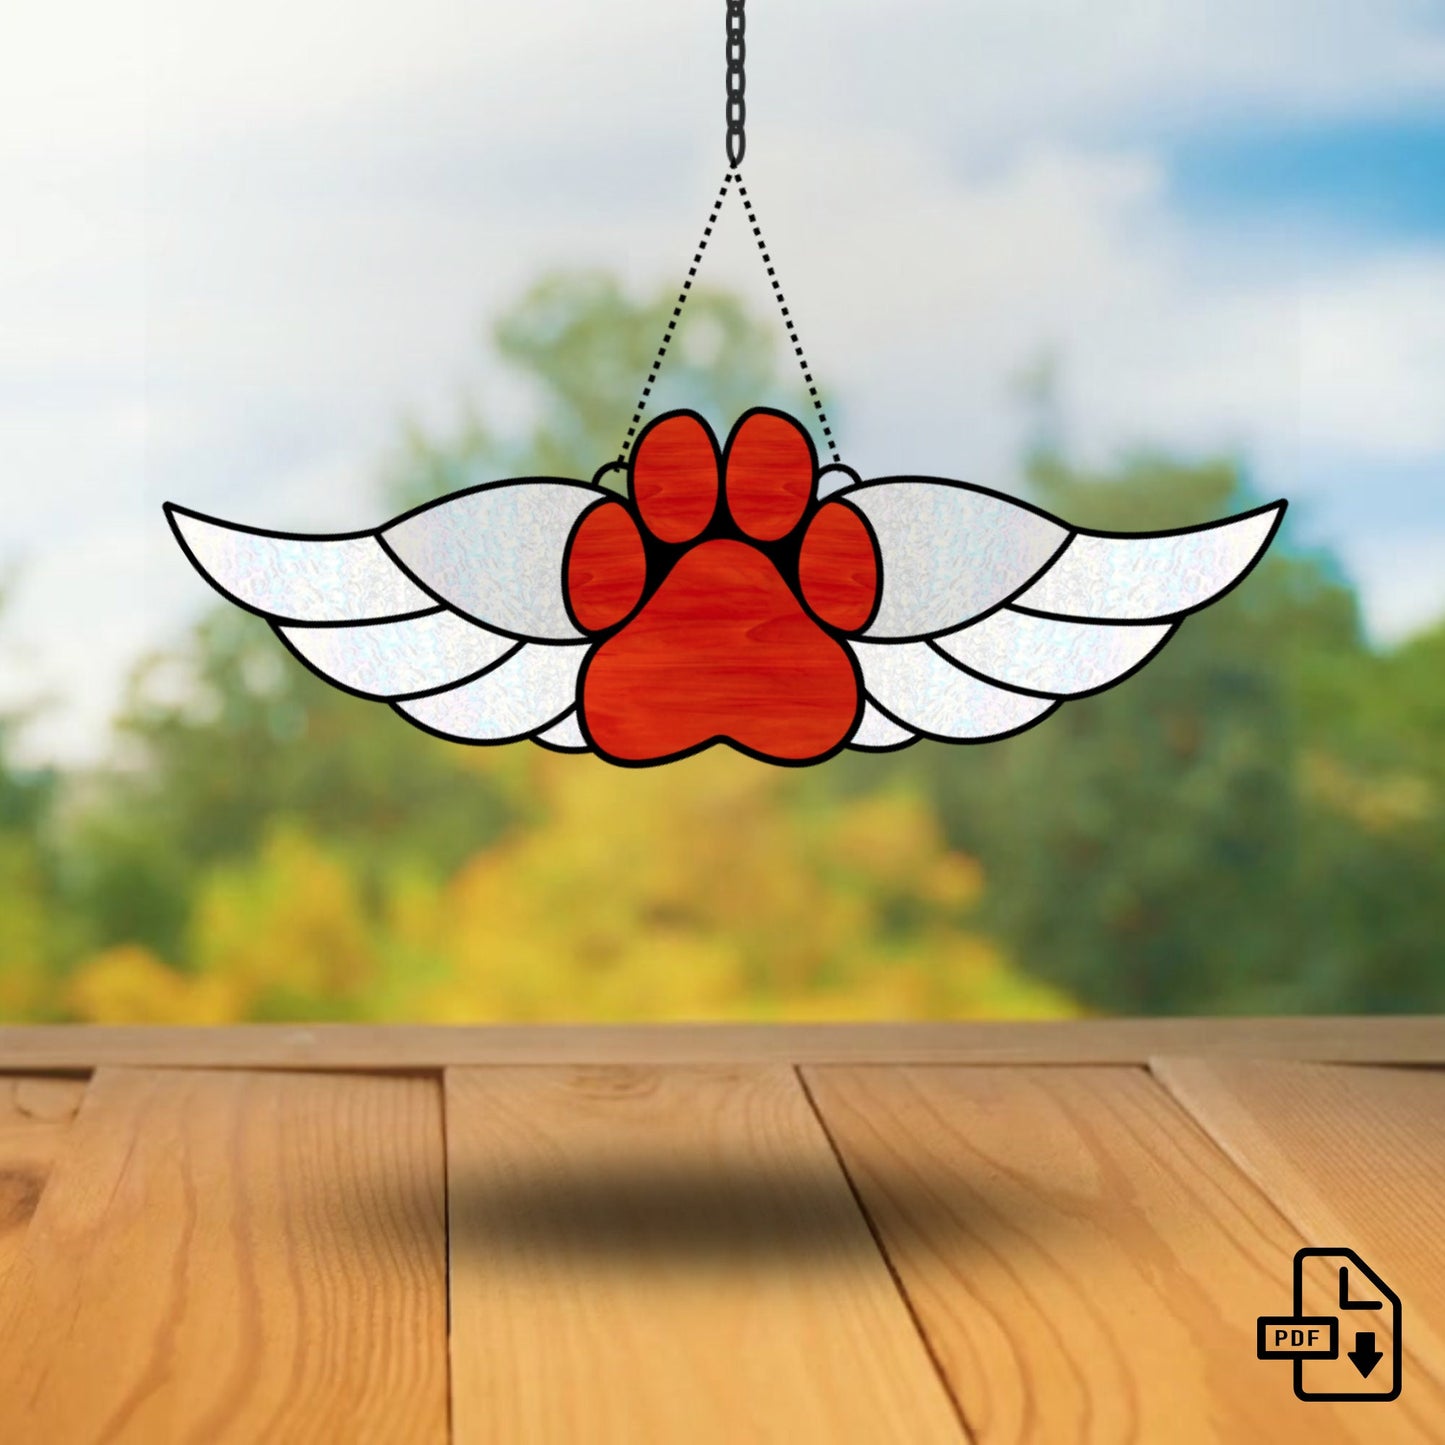 Pet Paw Stained Glass Pattern • Dog & Cat Angel Wings Stained Glass Pattern